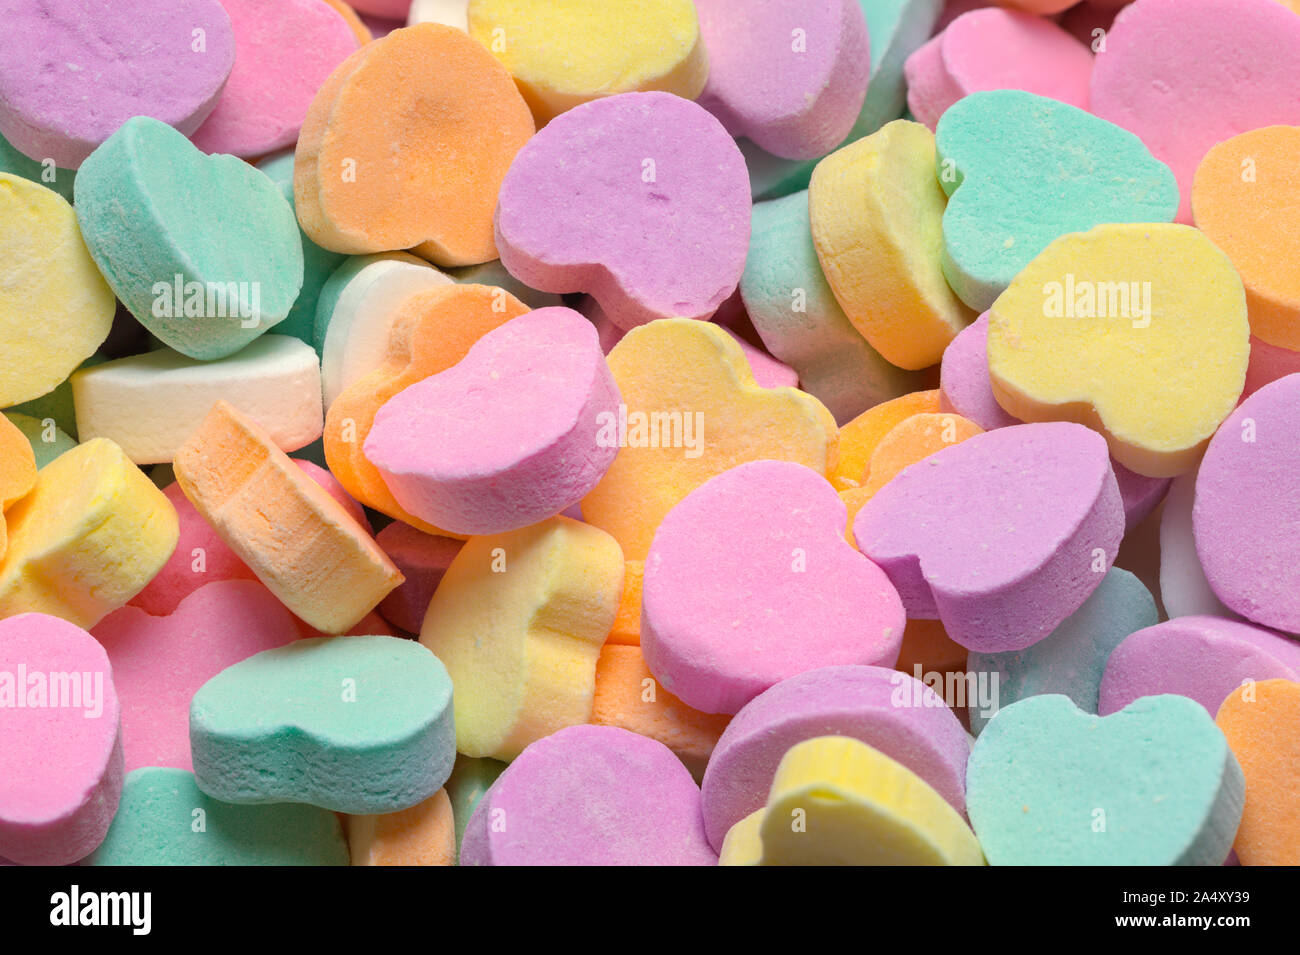 Pile of Pastle Valentines Hearts Candy Background. Stock Photo